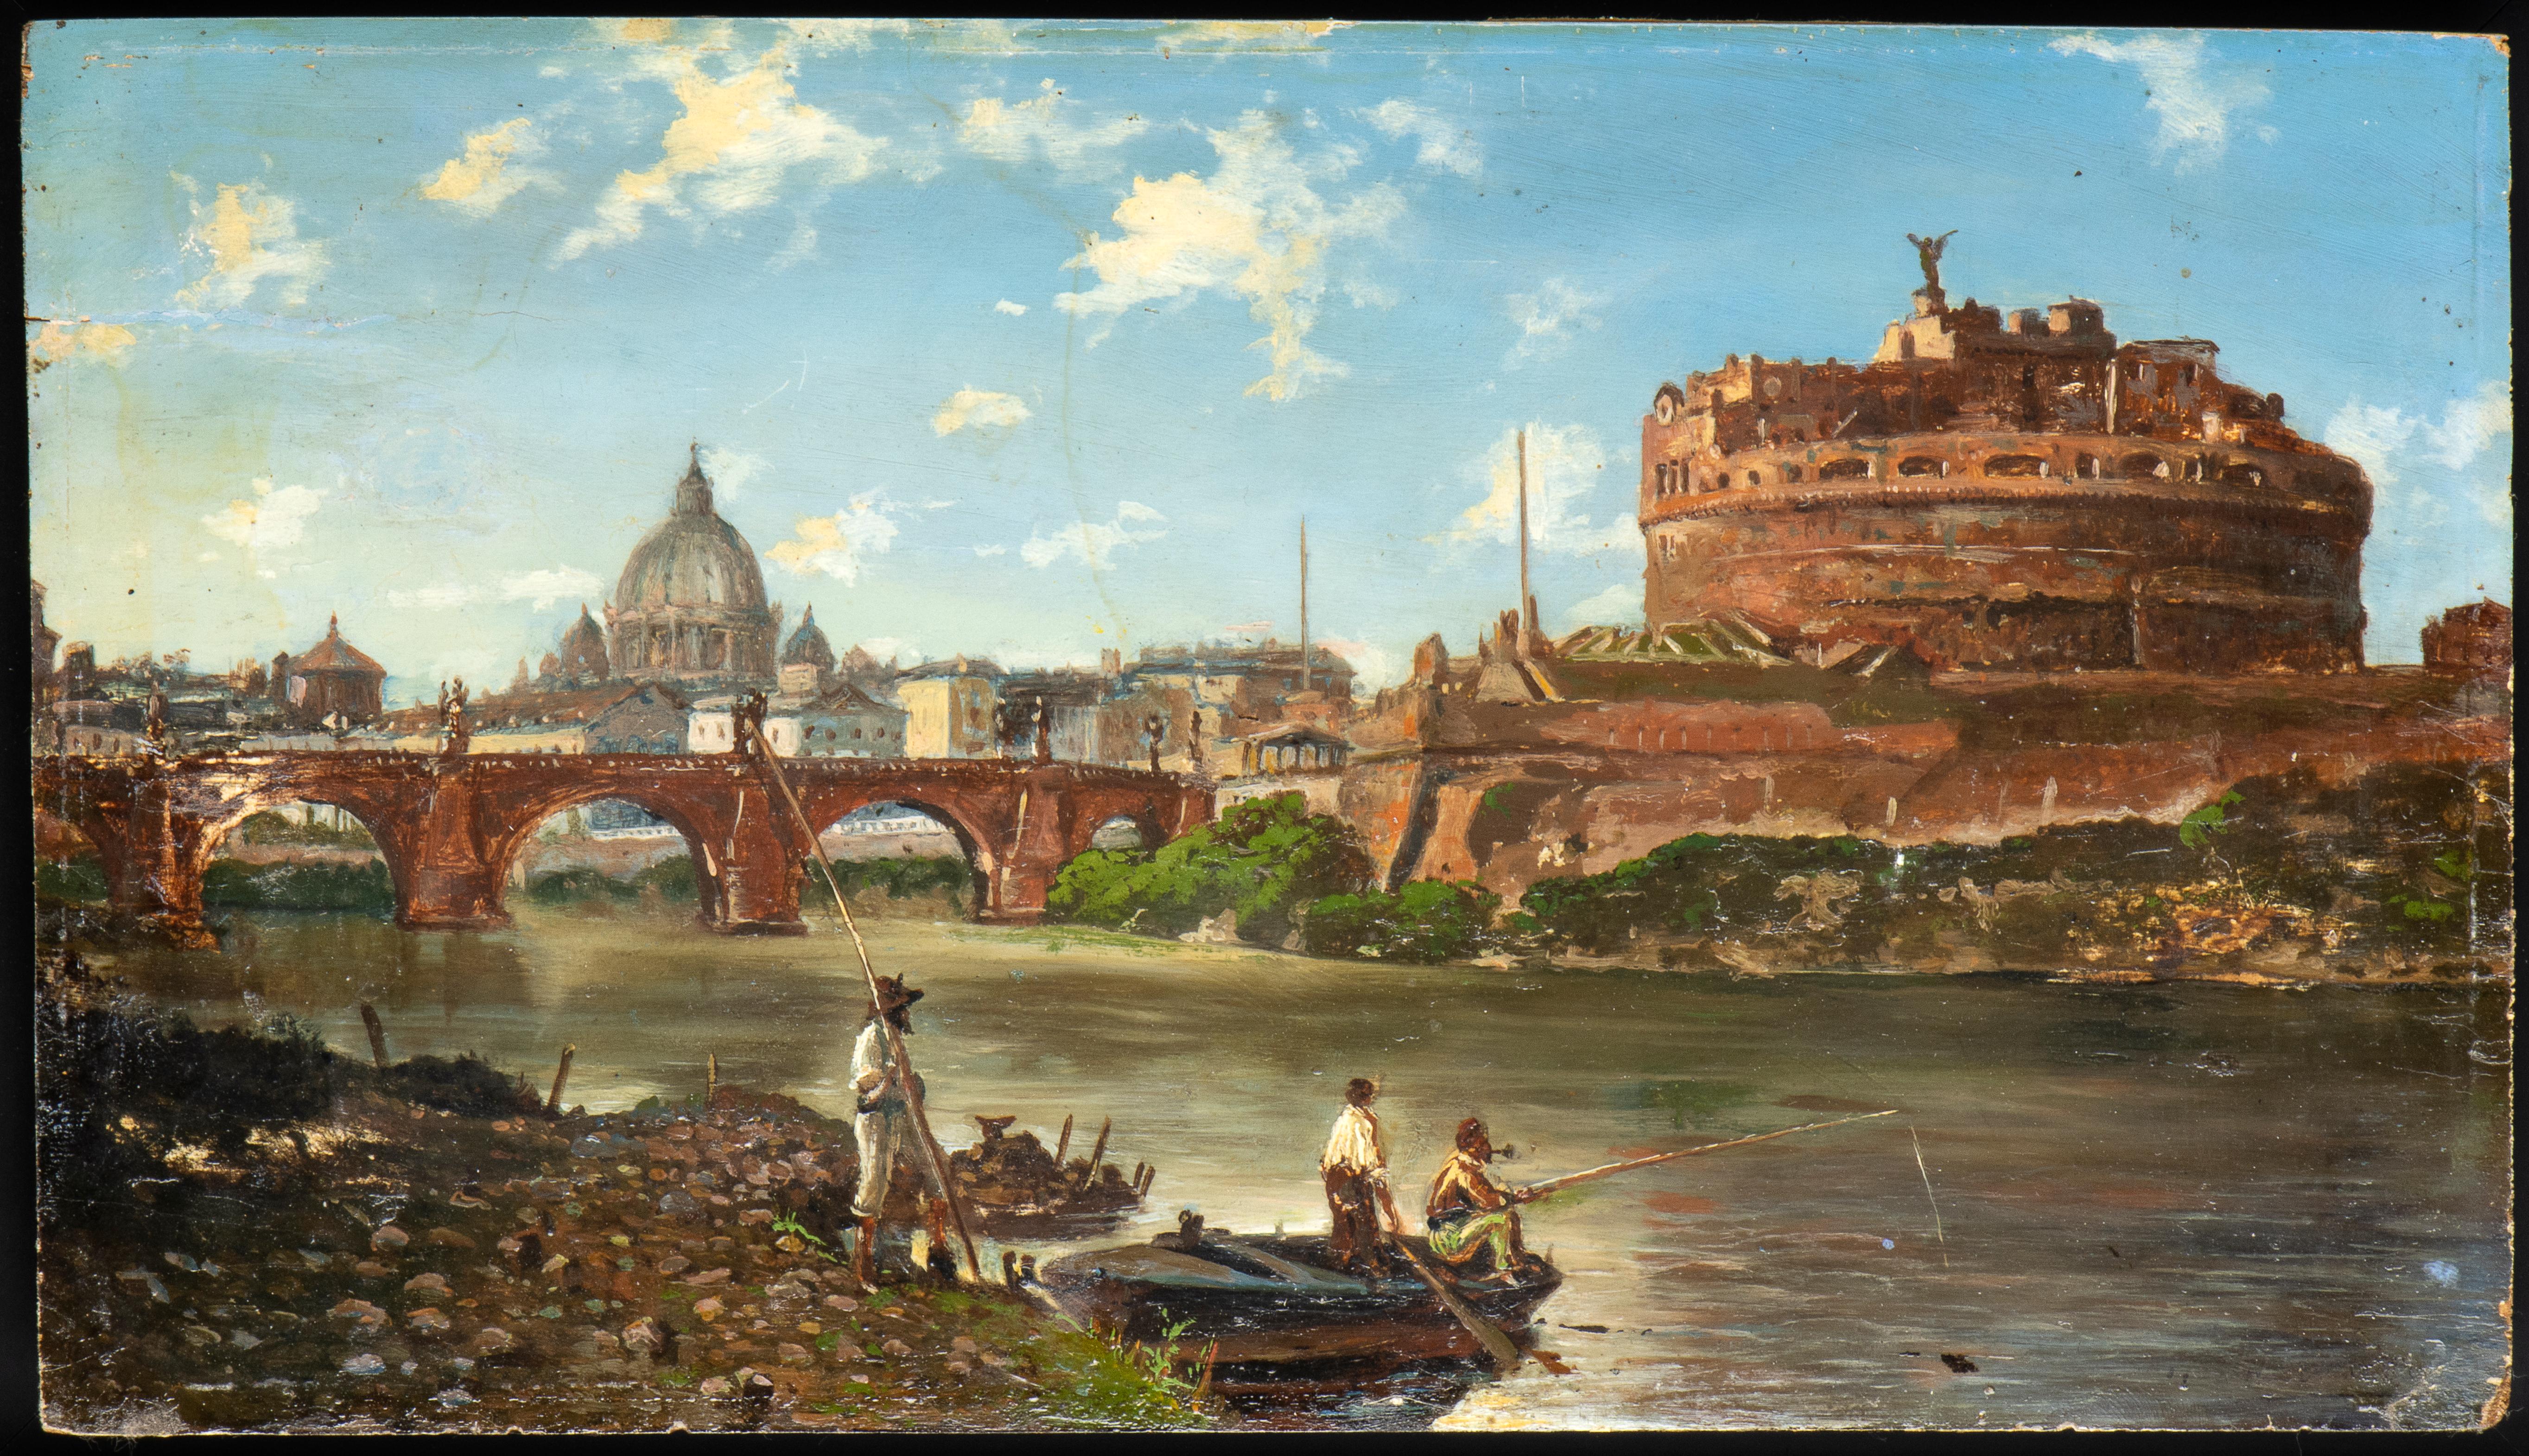 Elaborately framed, isolated in black modern frames this painting  represent a typically daily scene of Rome at the end of the 19th century in a perfect grand tour style; the view from the bank of the Tiber with fishermans and boats,  Castel